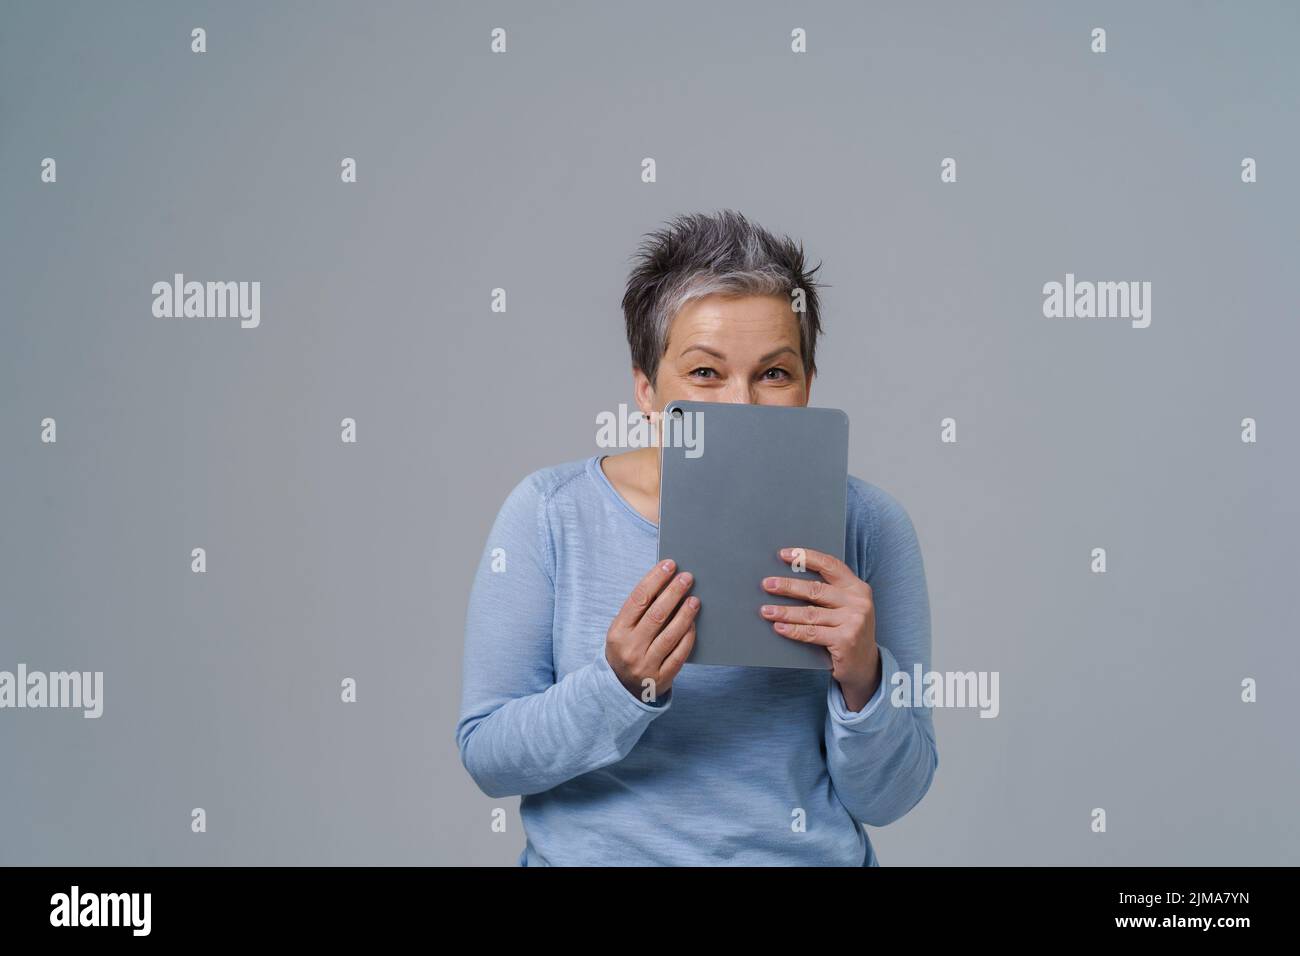 Shy mature woman hide holding digital tablet working or shopping online, checking on social media. Pretty grey haired woman in blue blouse isolated on white background. Stock Photo